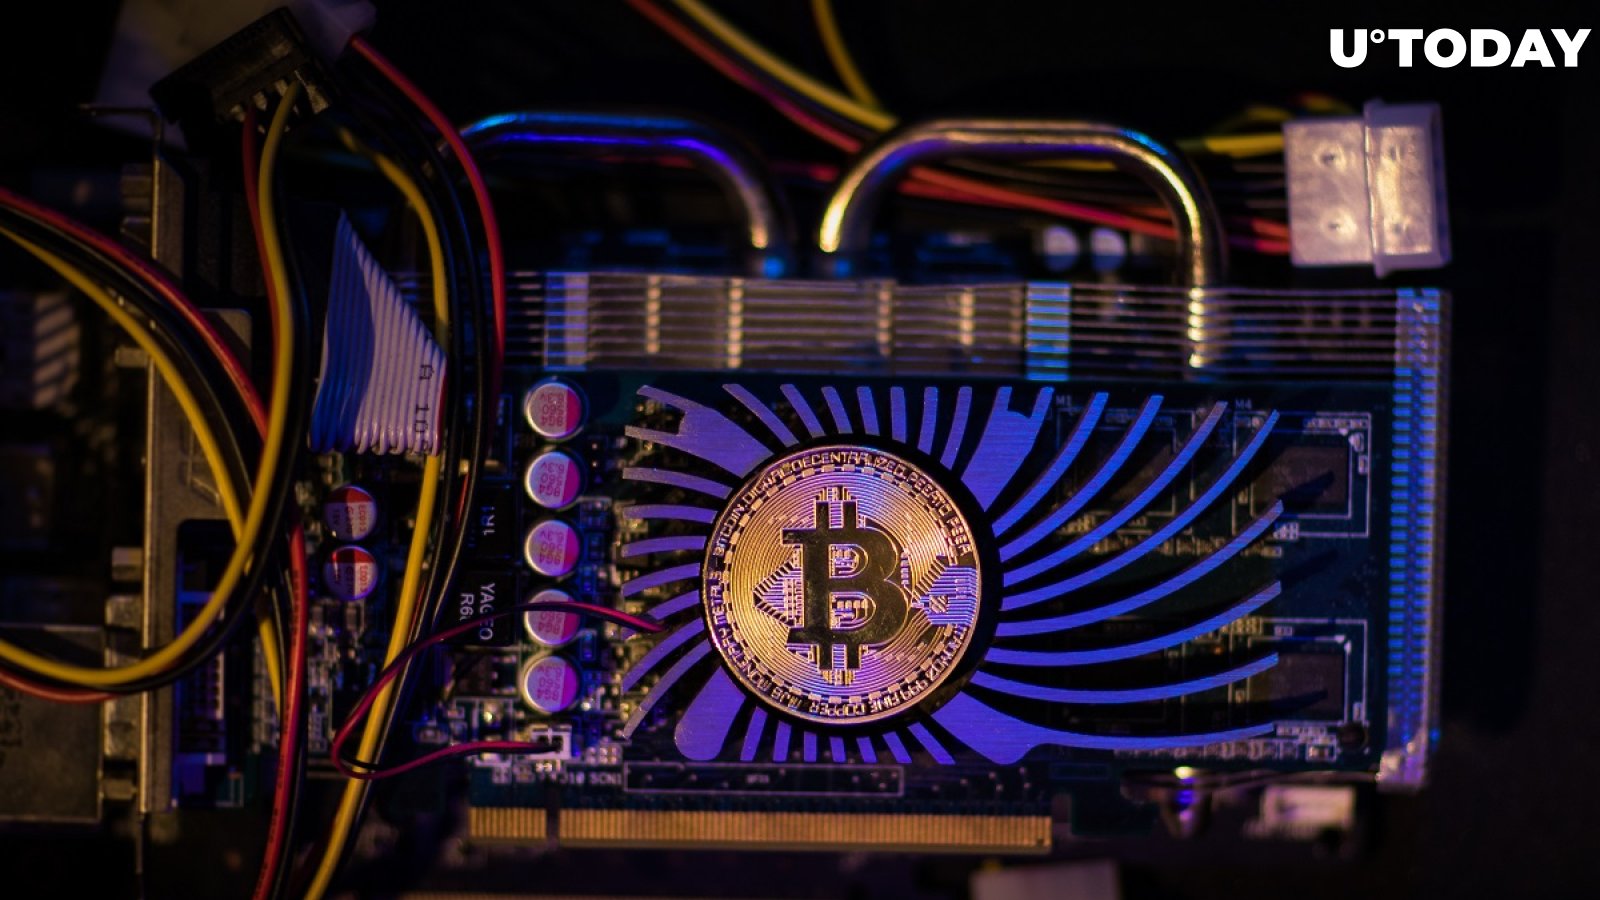  Bitcoin Hash Rate Surges to New All-Time High of 148 EH/s